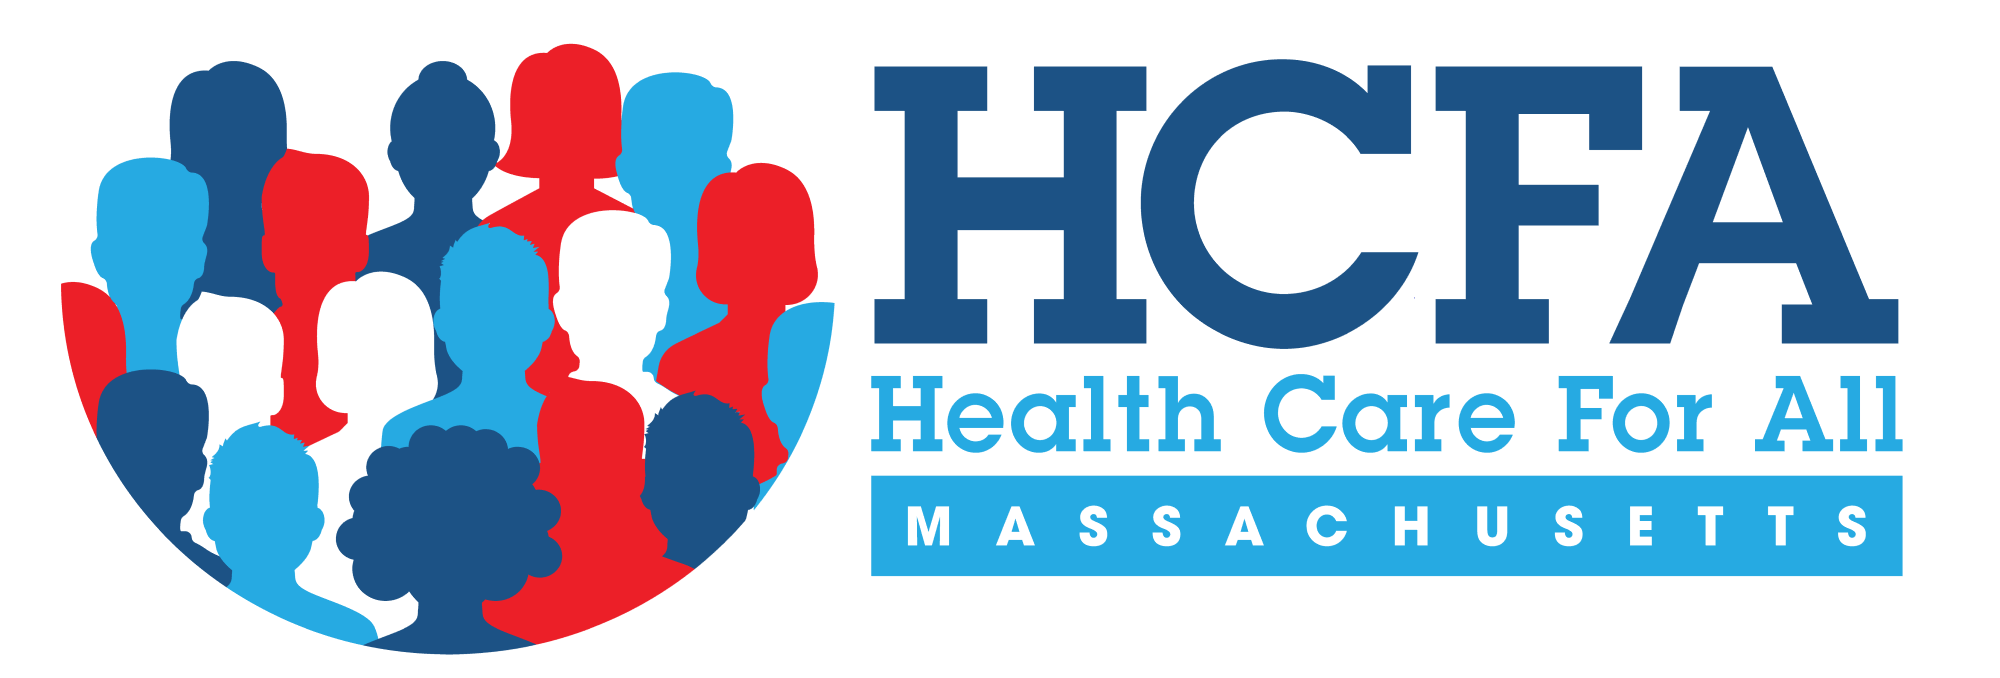 PRESS STATEMENT: Statement from Health Care For All’s Executive Director Amy Rosenthal Regarding the “Family Glitch” Final Approval